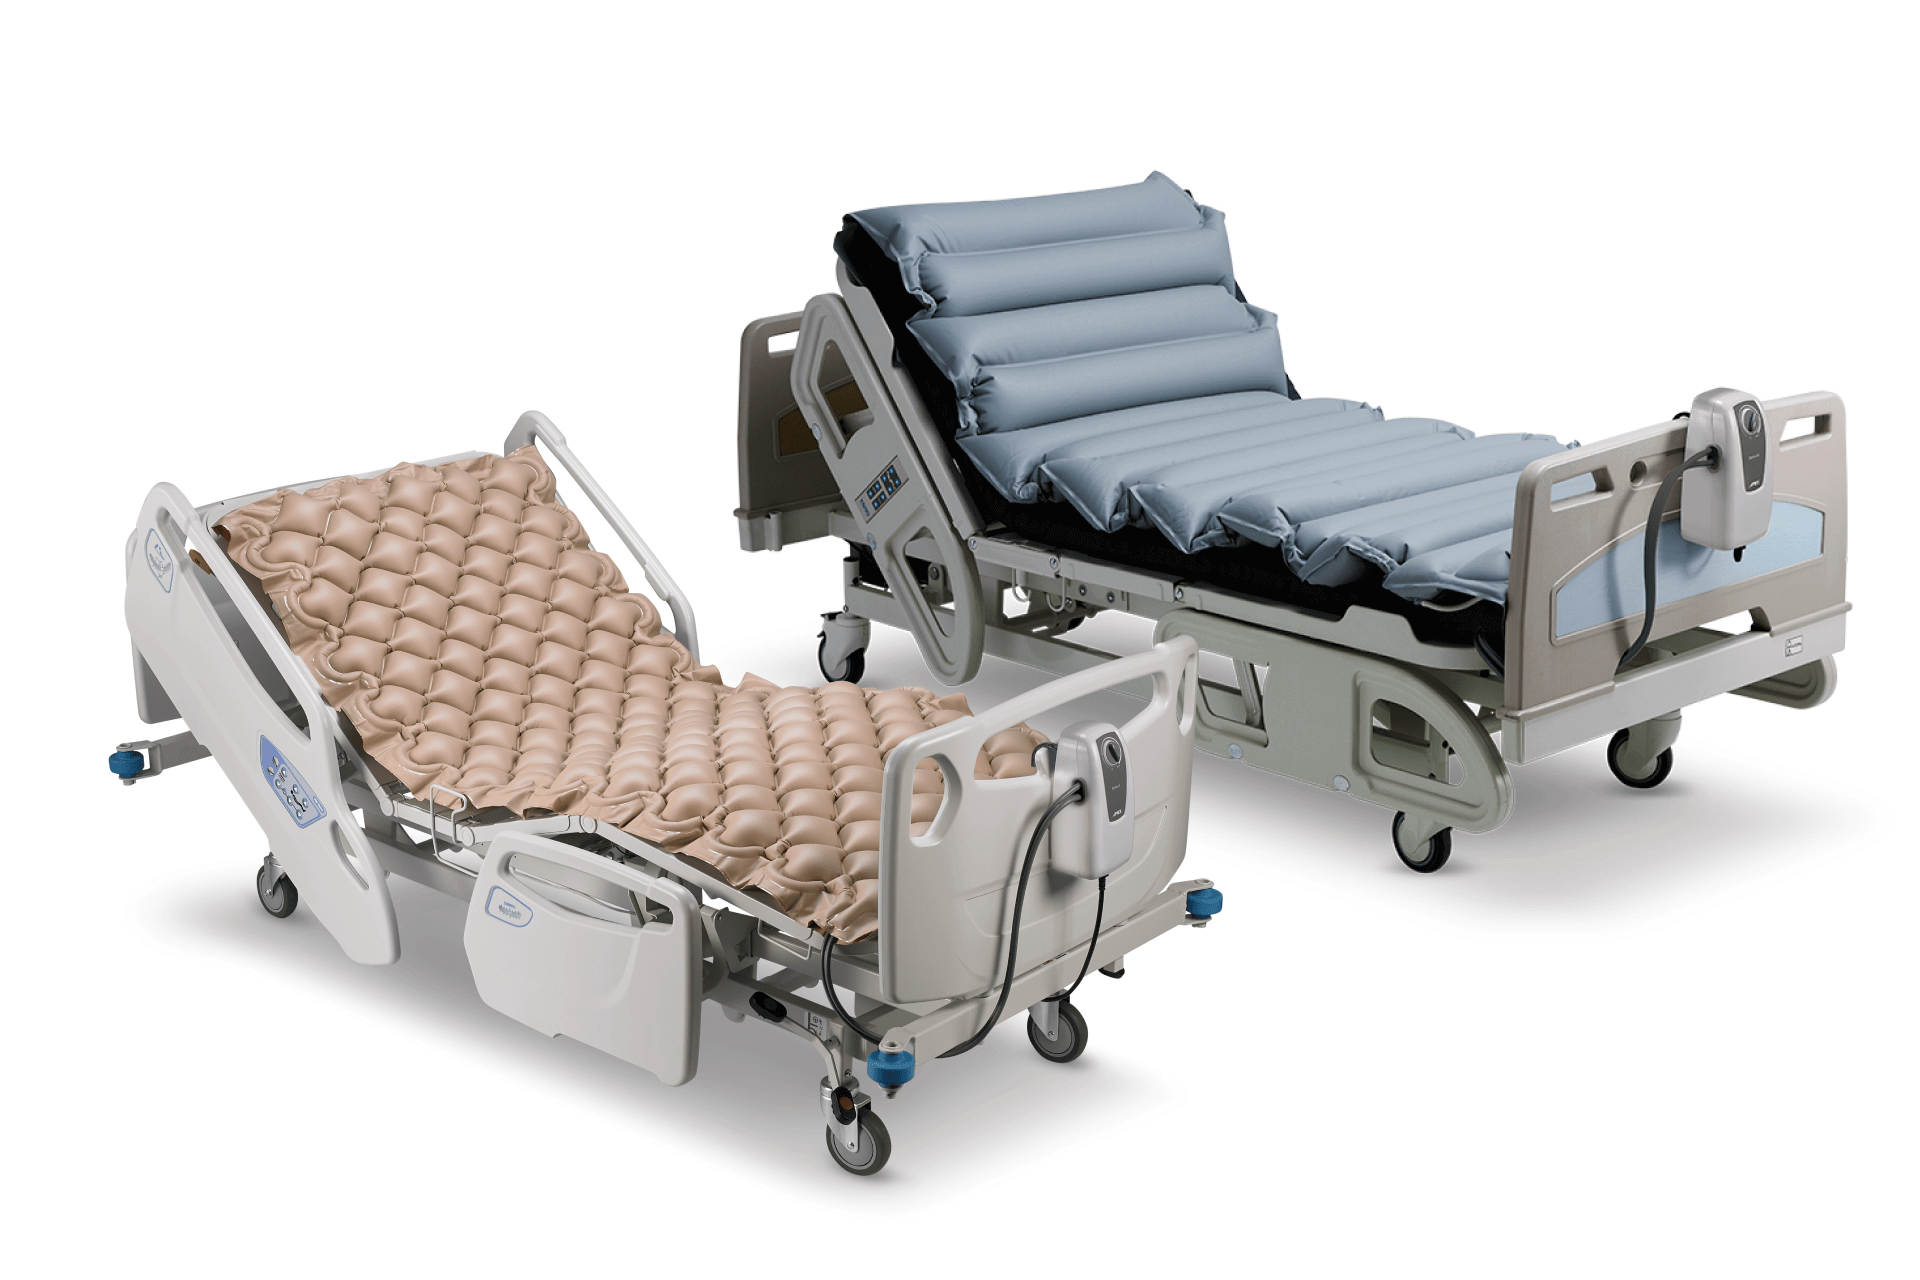 Domus 1 & 2 - medical bed - US Wellell